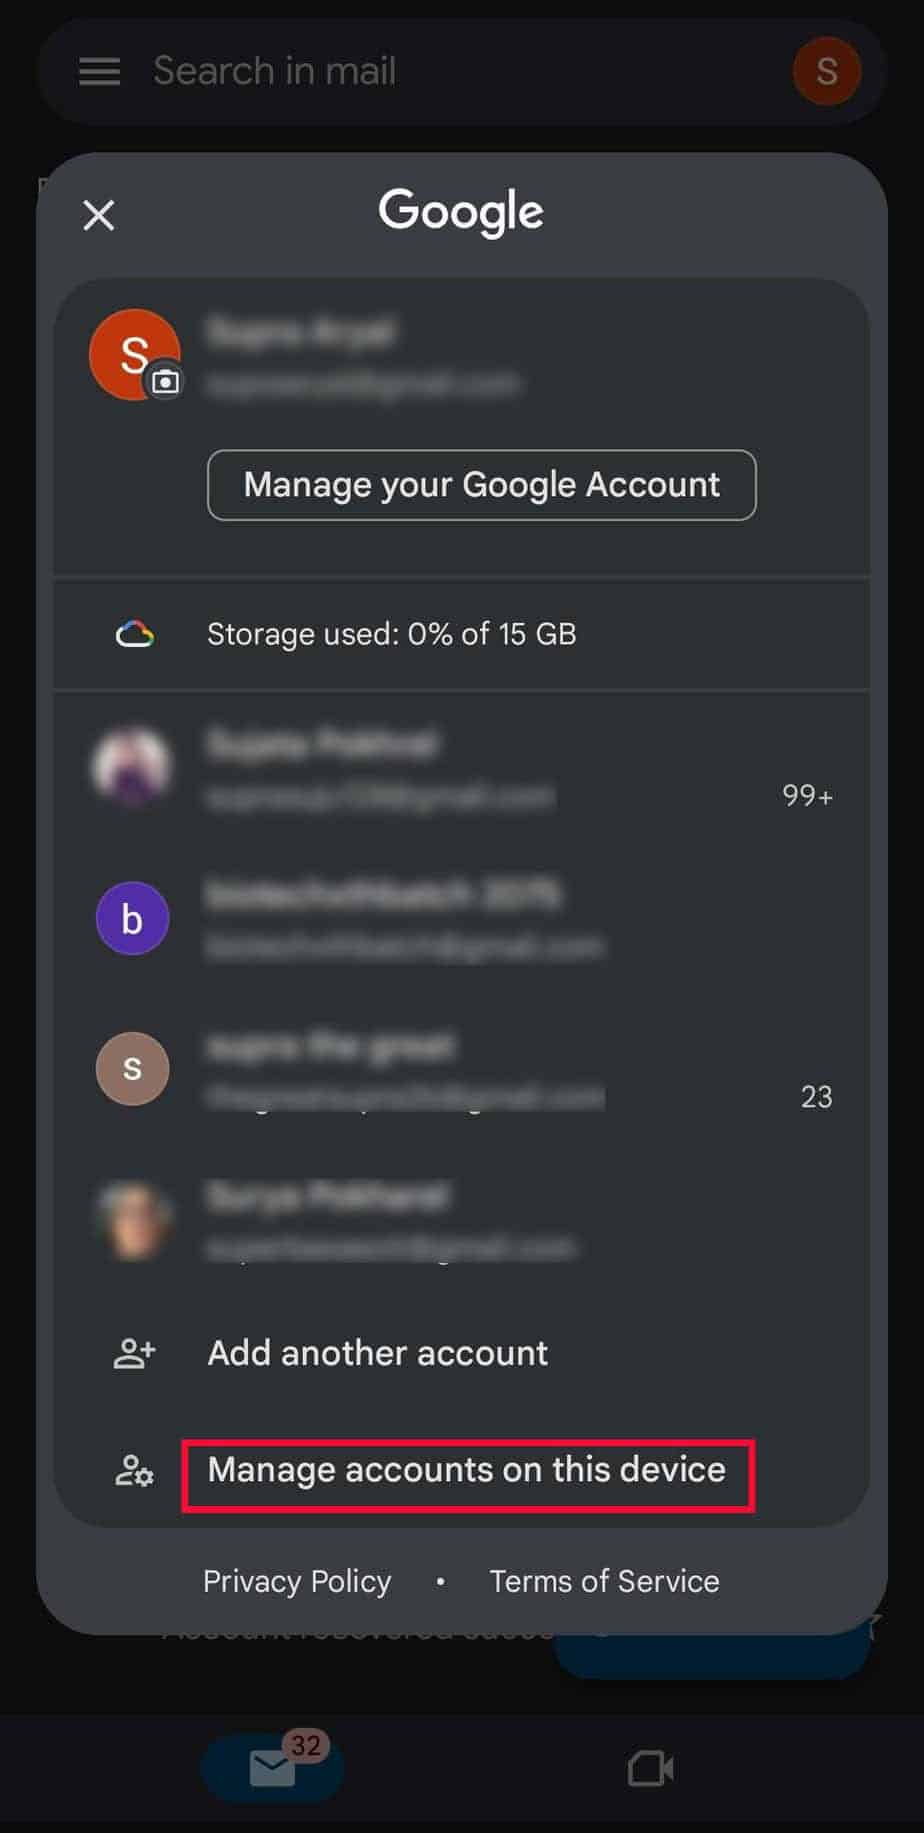 manage-accounts-on-this-device-android